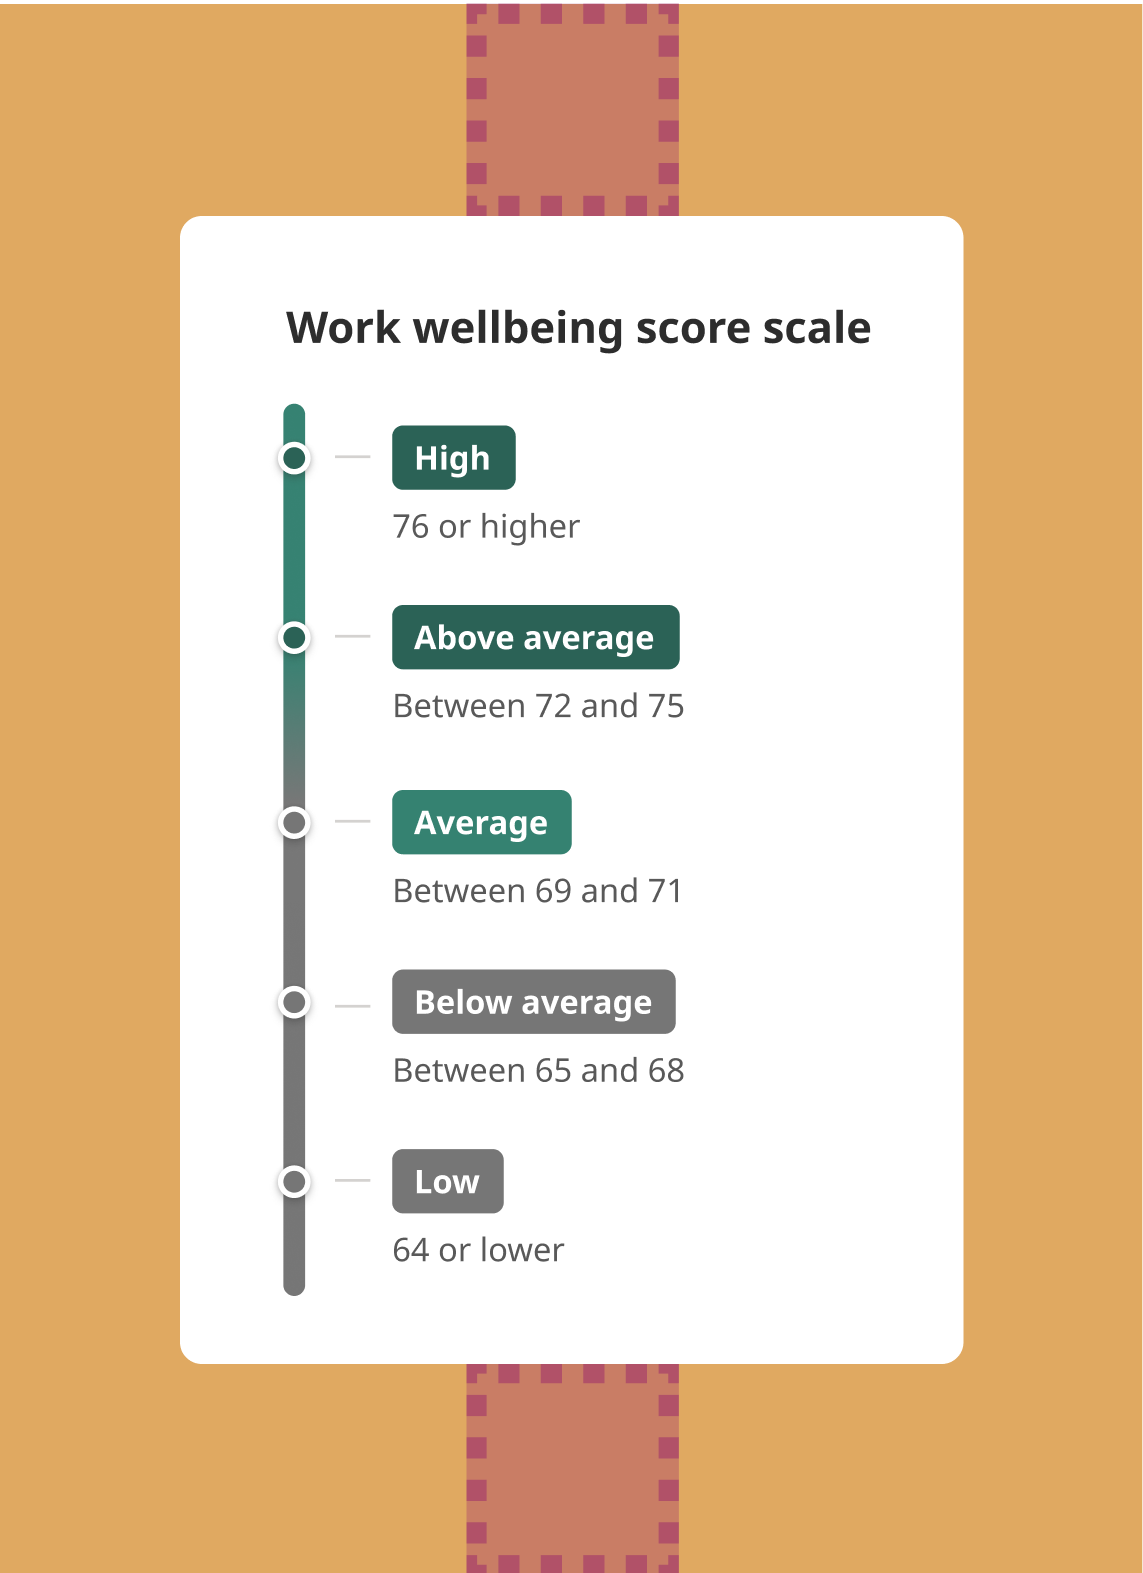 Work Wellbeing Scores fall into one of the five groups: Low, Below average, Average, Above average, or High.